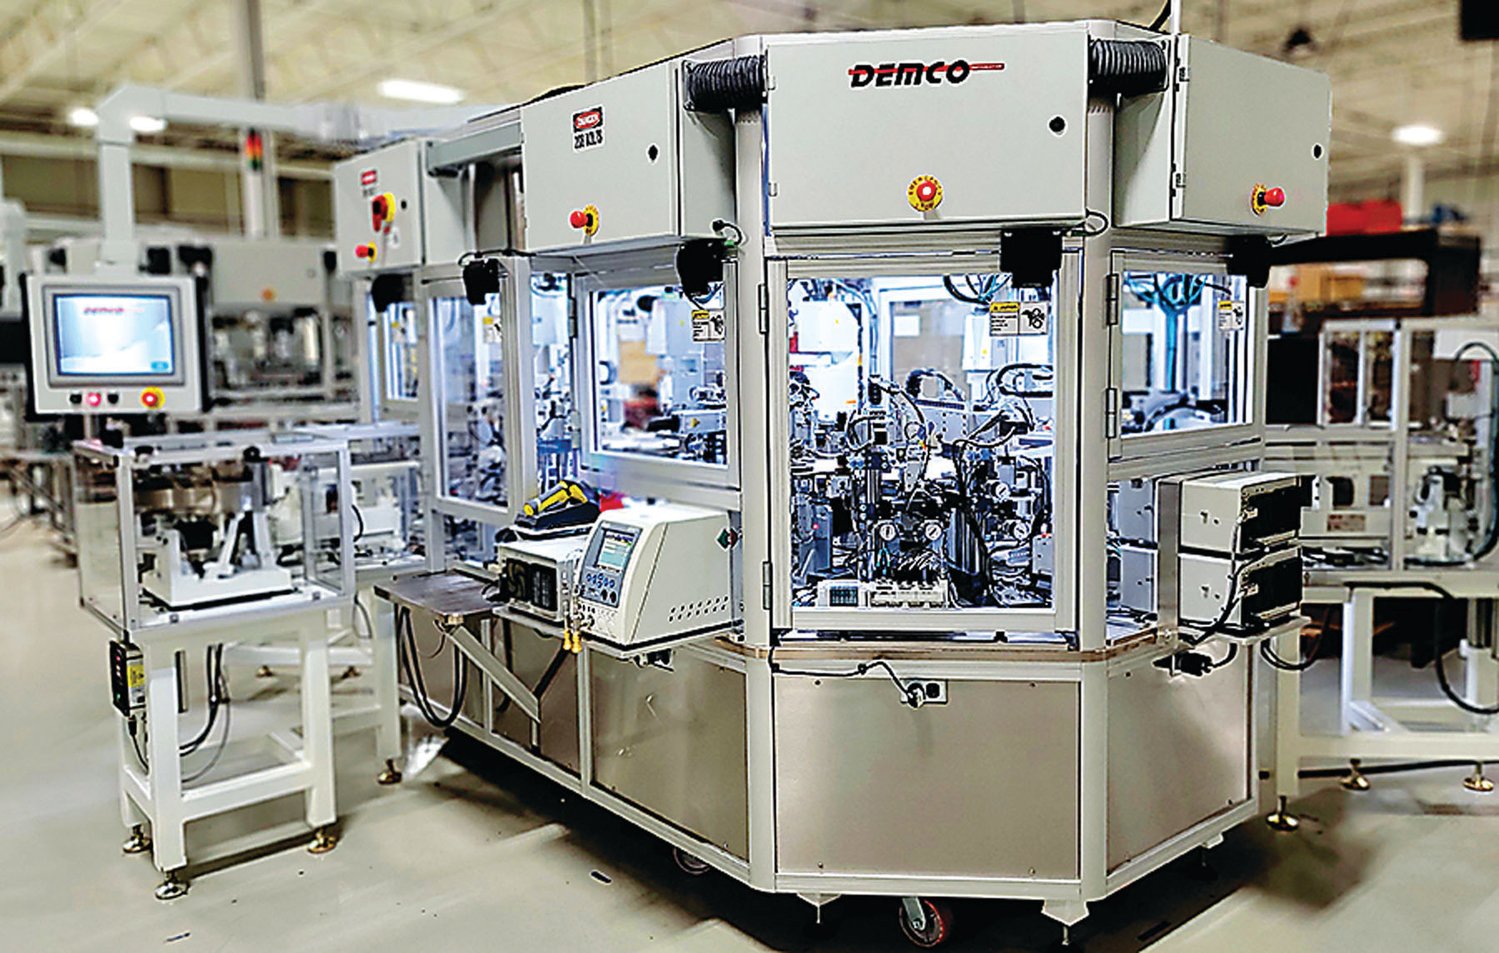 Demco Automation, a leading supplier of industrial robotics and automated manufacturing systems to technology-based industry sectors throughout the Americas, Europe, and Asia, designs and manufactures all products within its Quakertown facility.